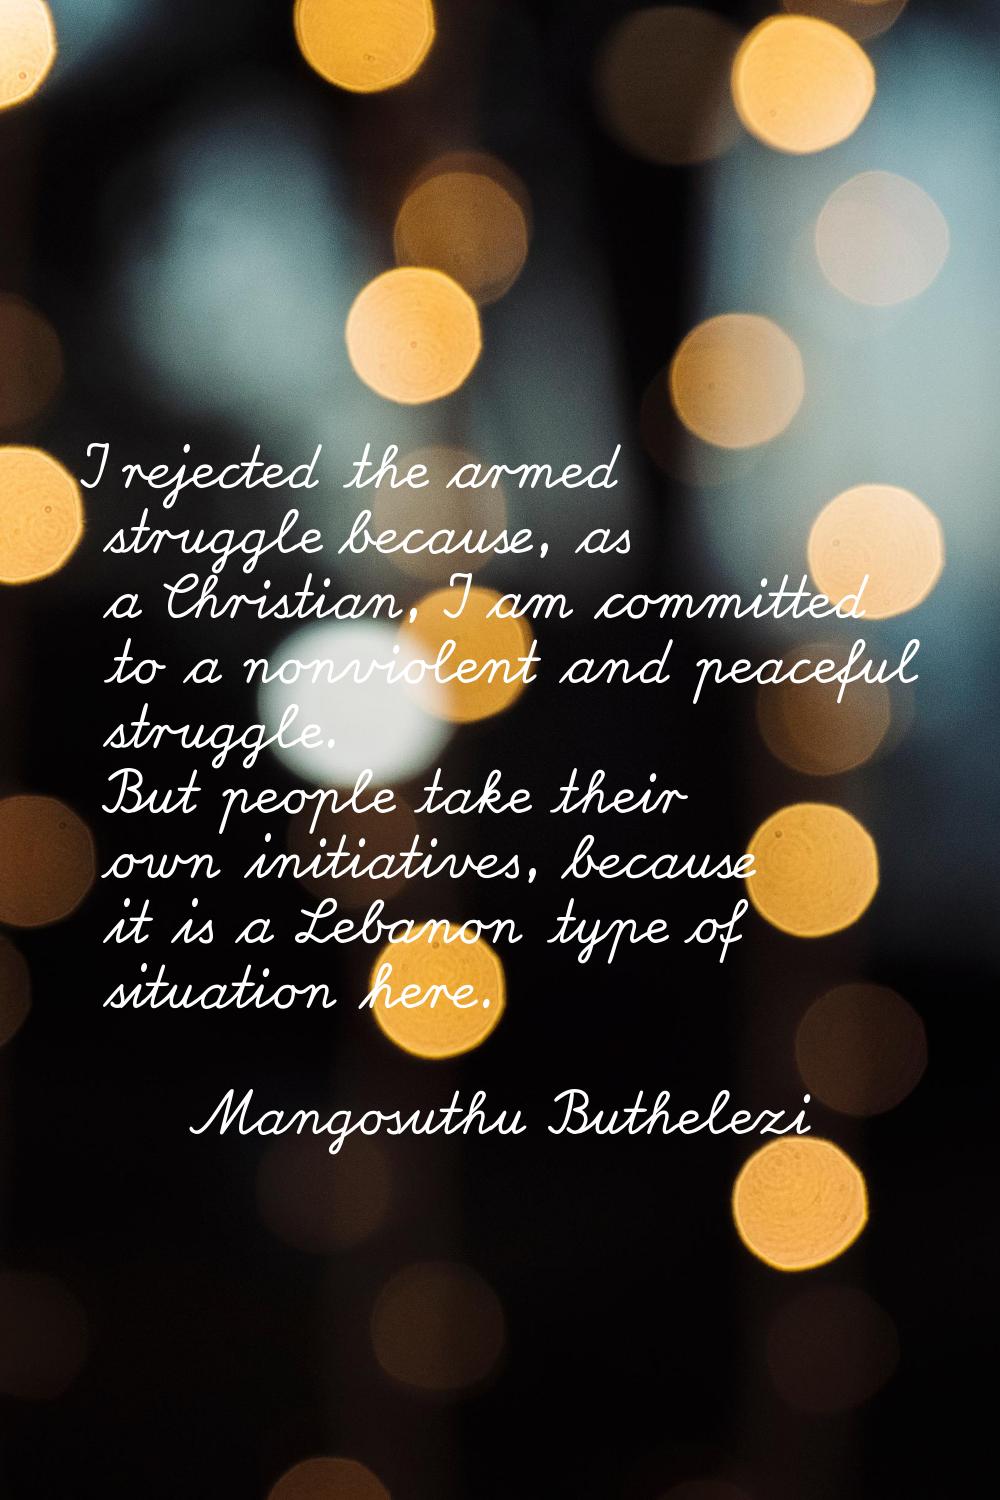 I rejected the armed struggle because, as a Christian, I am committed to a nonviolent and peaceful 